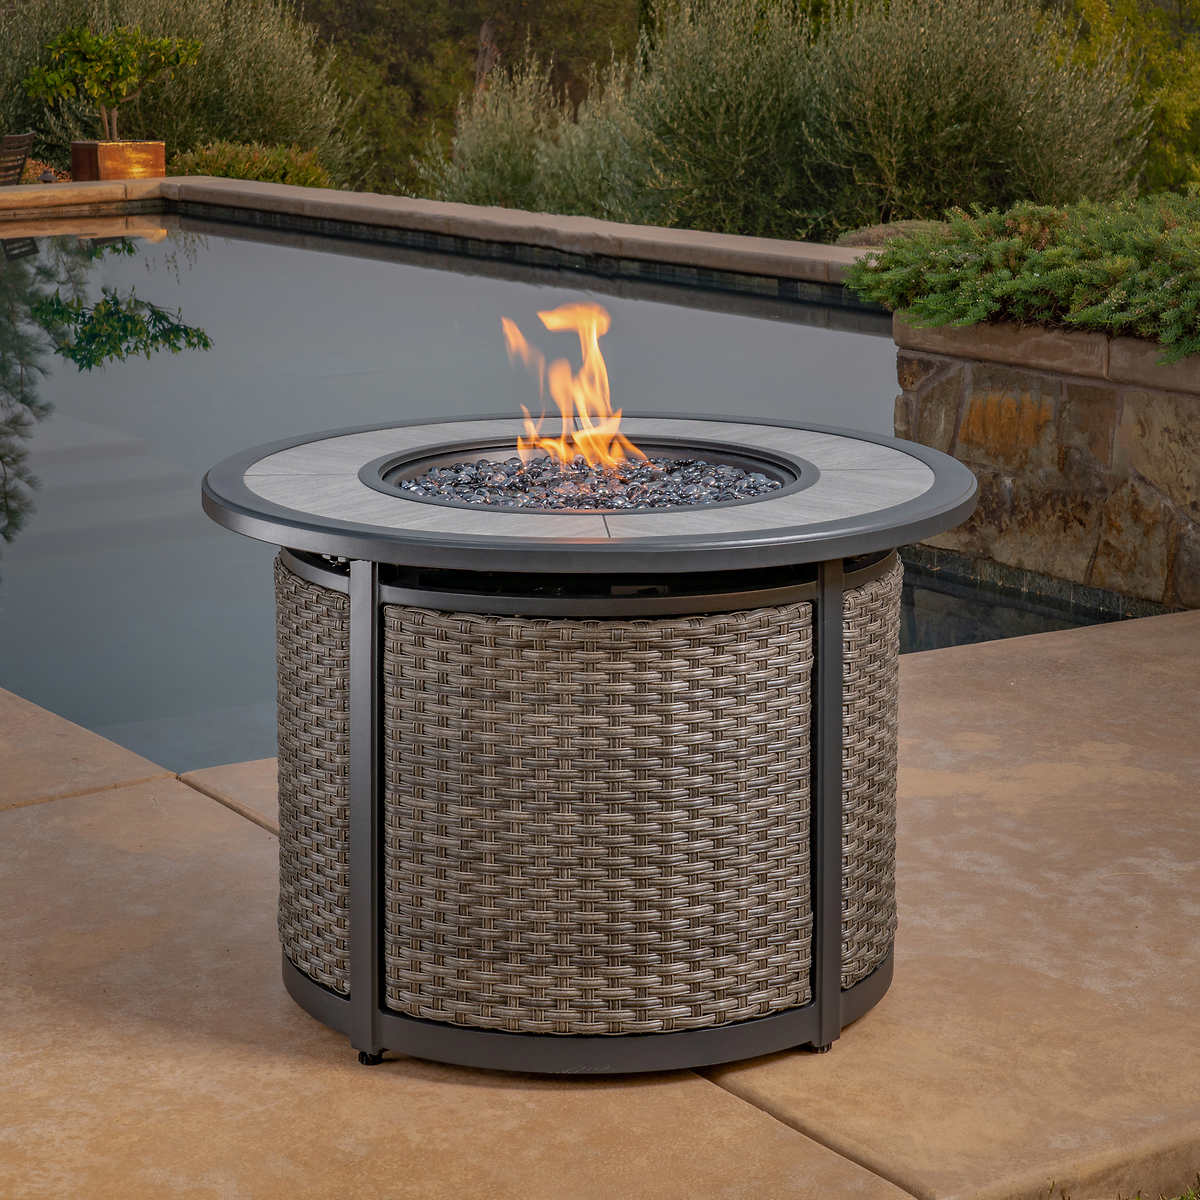 Madison Fire Pit Table Costco, Are Fire Pits Illegal In California